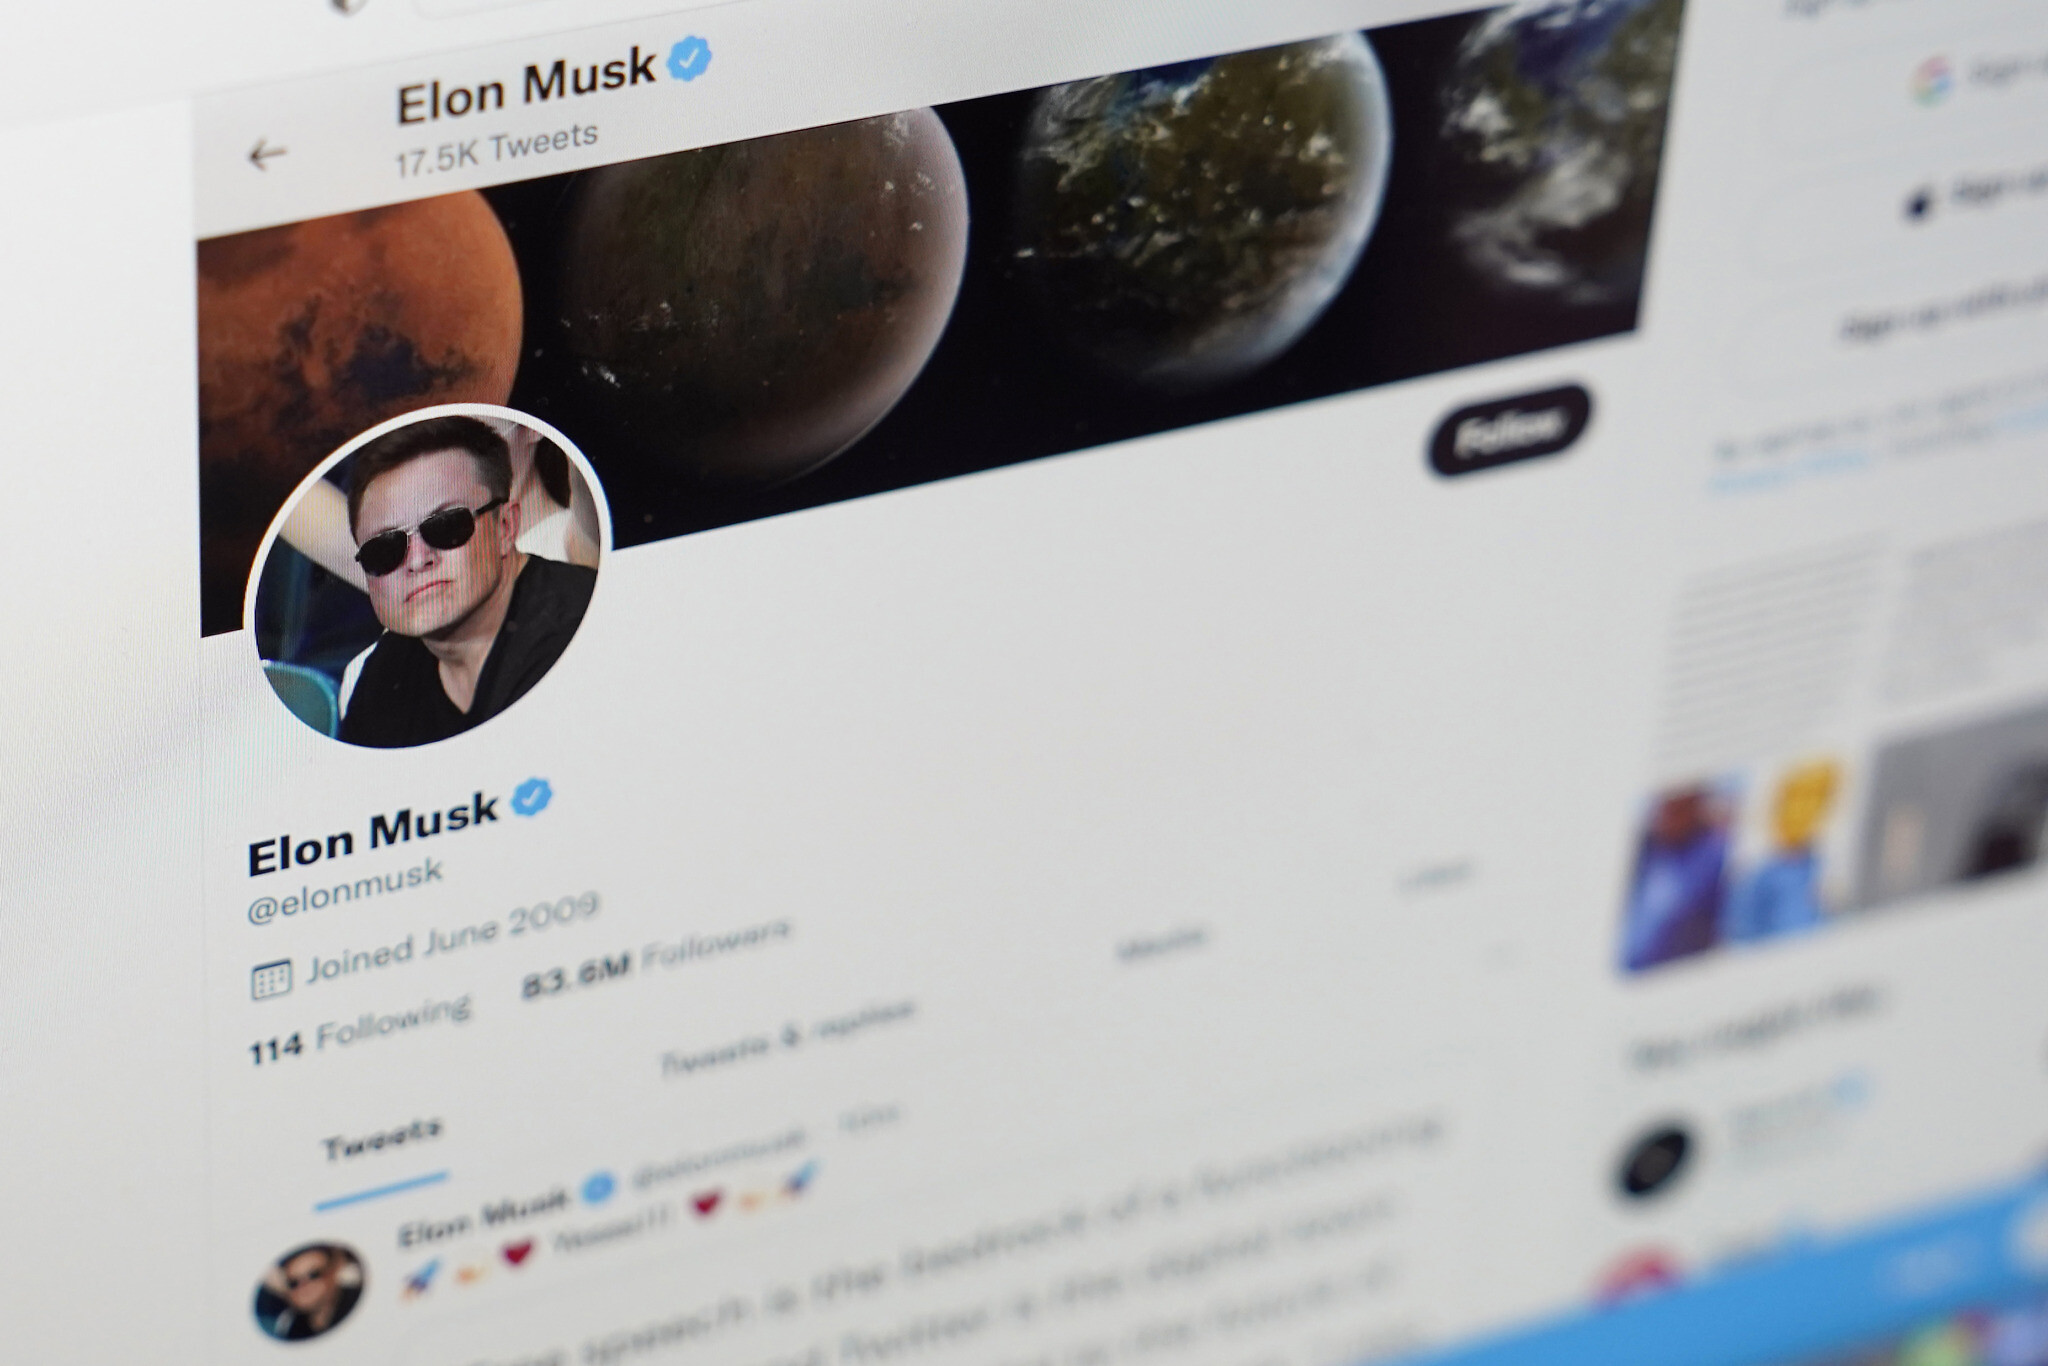 Langvardt Discusses Free-Speech Implications of Musk’s Twitter Purchase